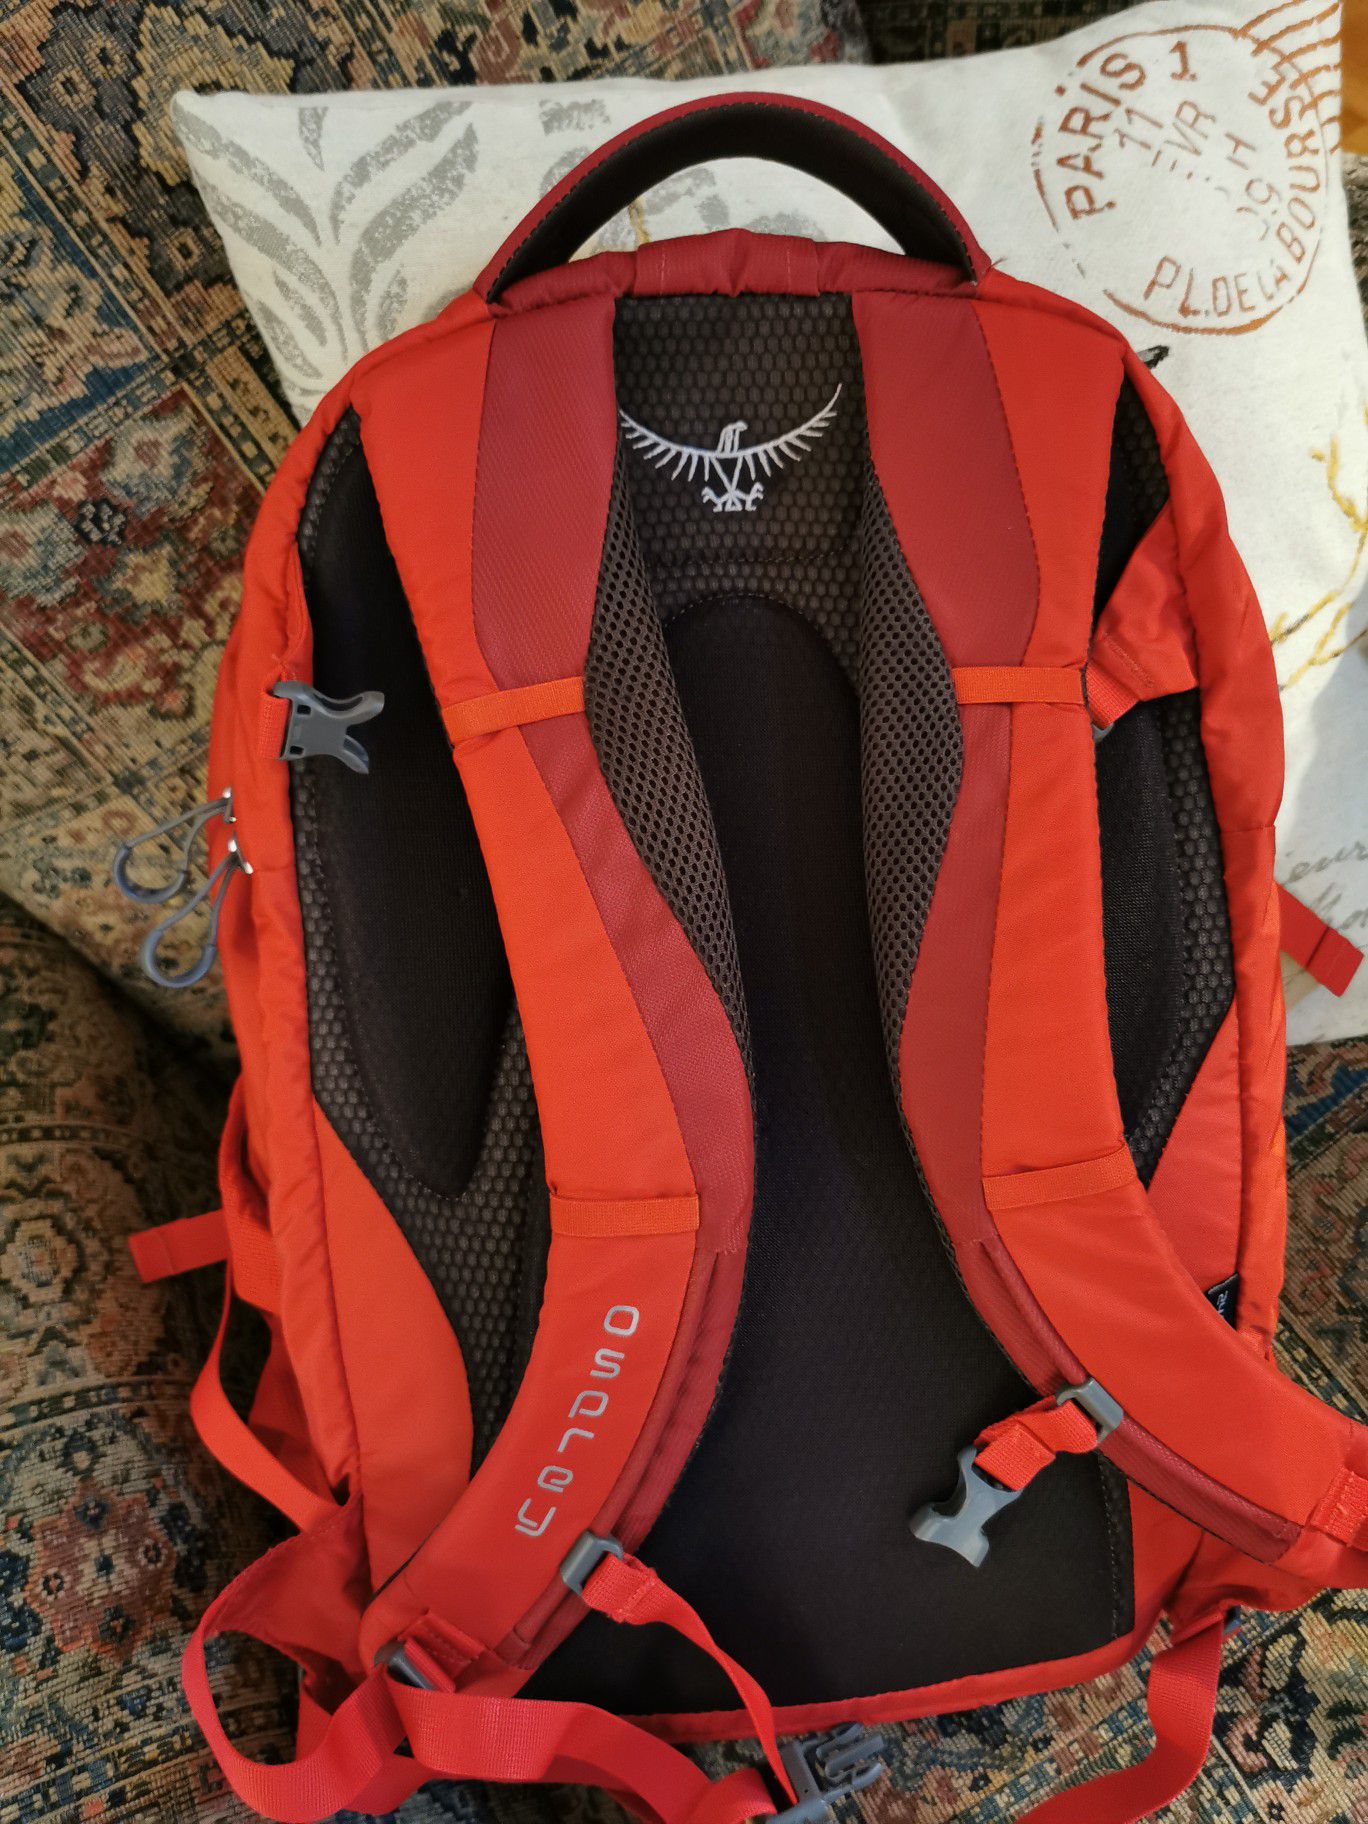 Osprey Comet Backpack. Perfect condition. Like new. Clean. Comes with lifetime warranty from Osprey.